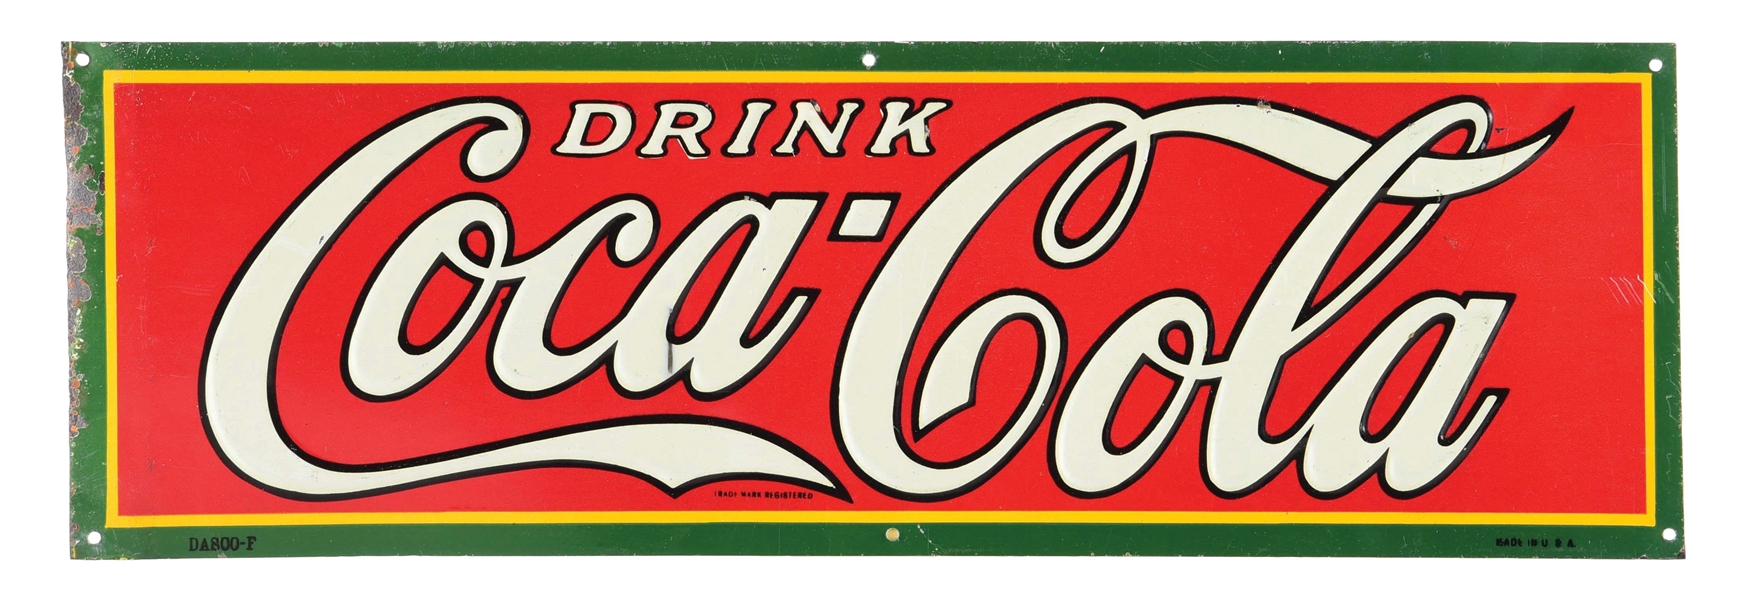 DRINK COCA-COLA SINGLE-SIDED EMBOSSED TIN STRIP SIGN.